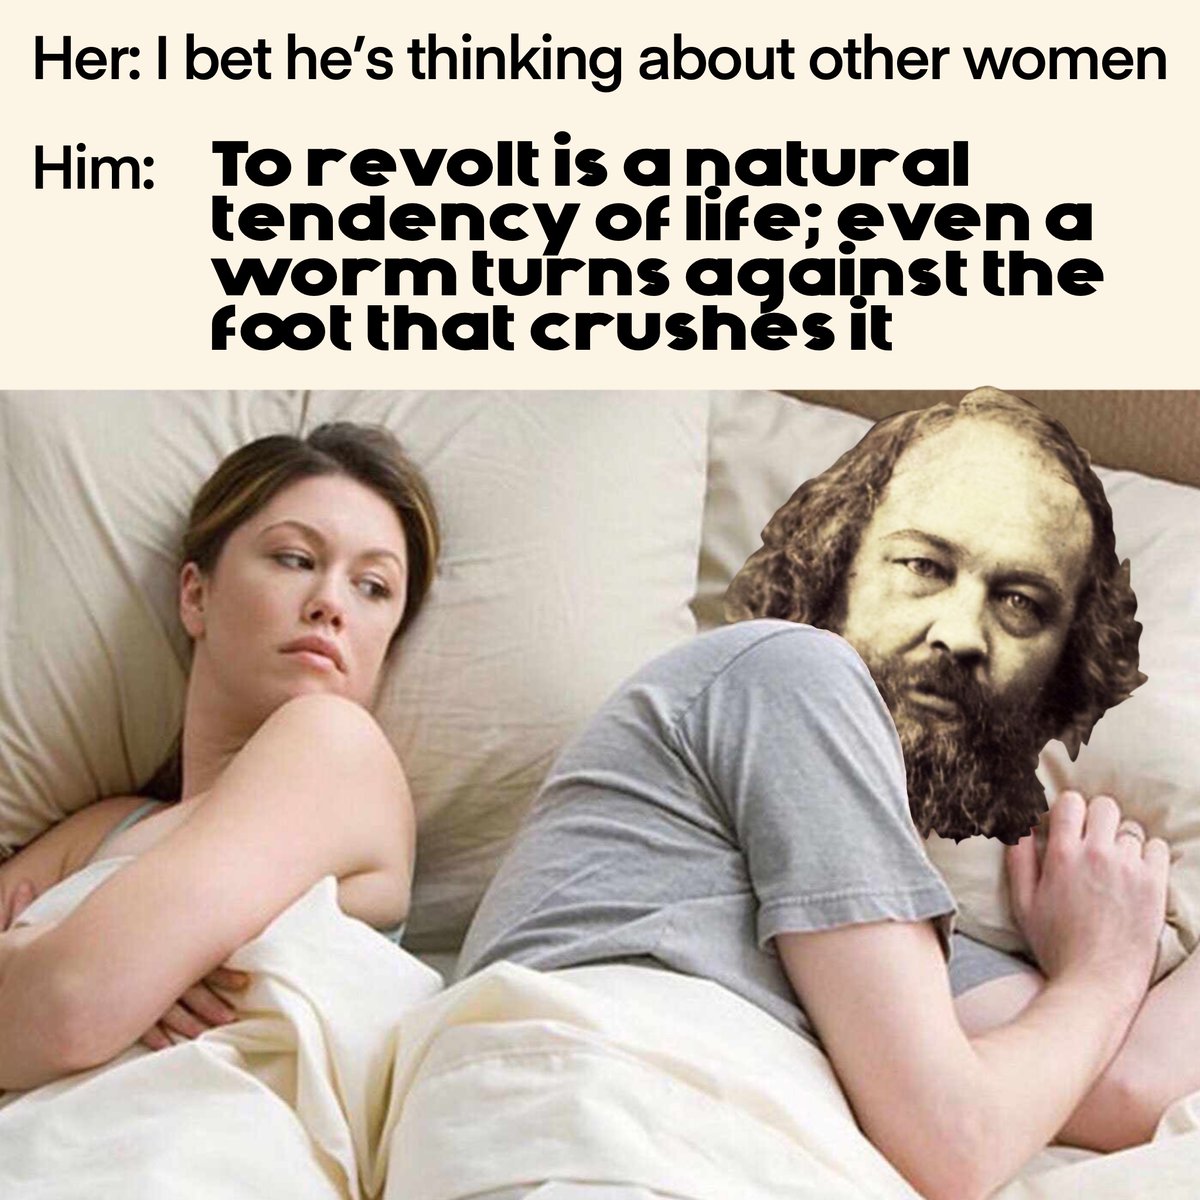 Don’t worry Bakunin we would still love you if you were a worm.